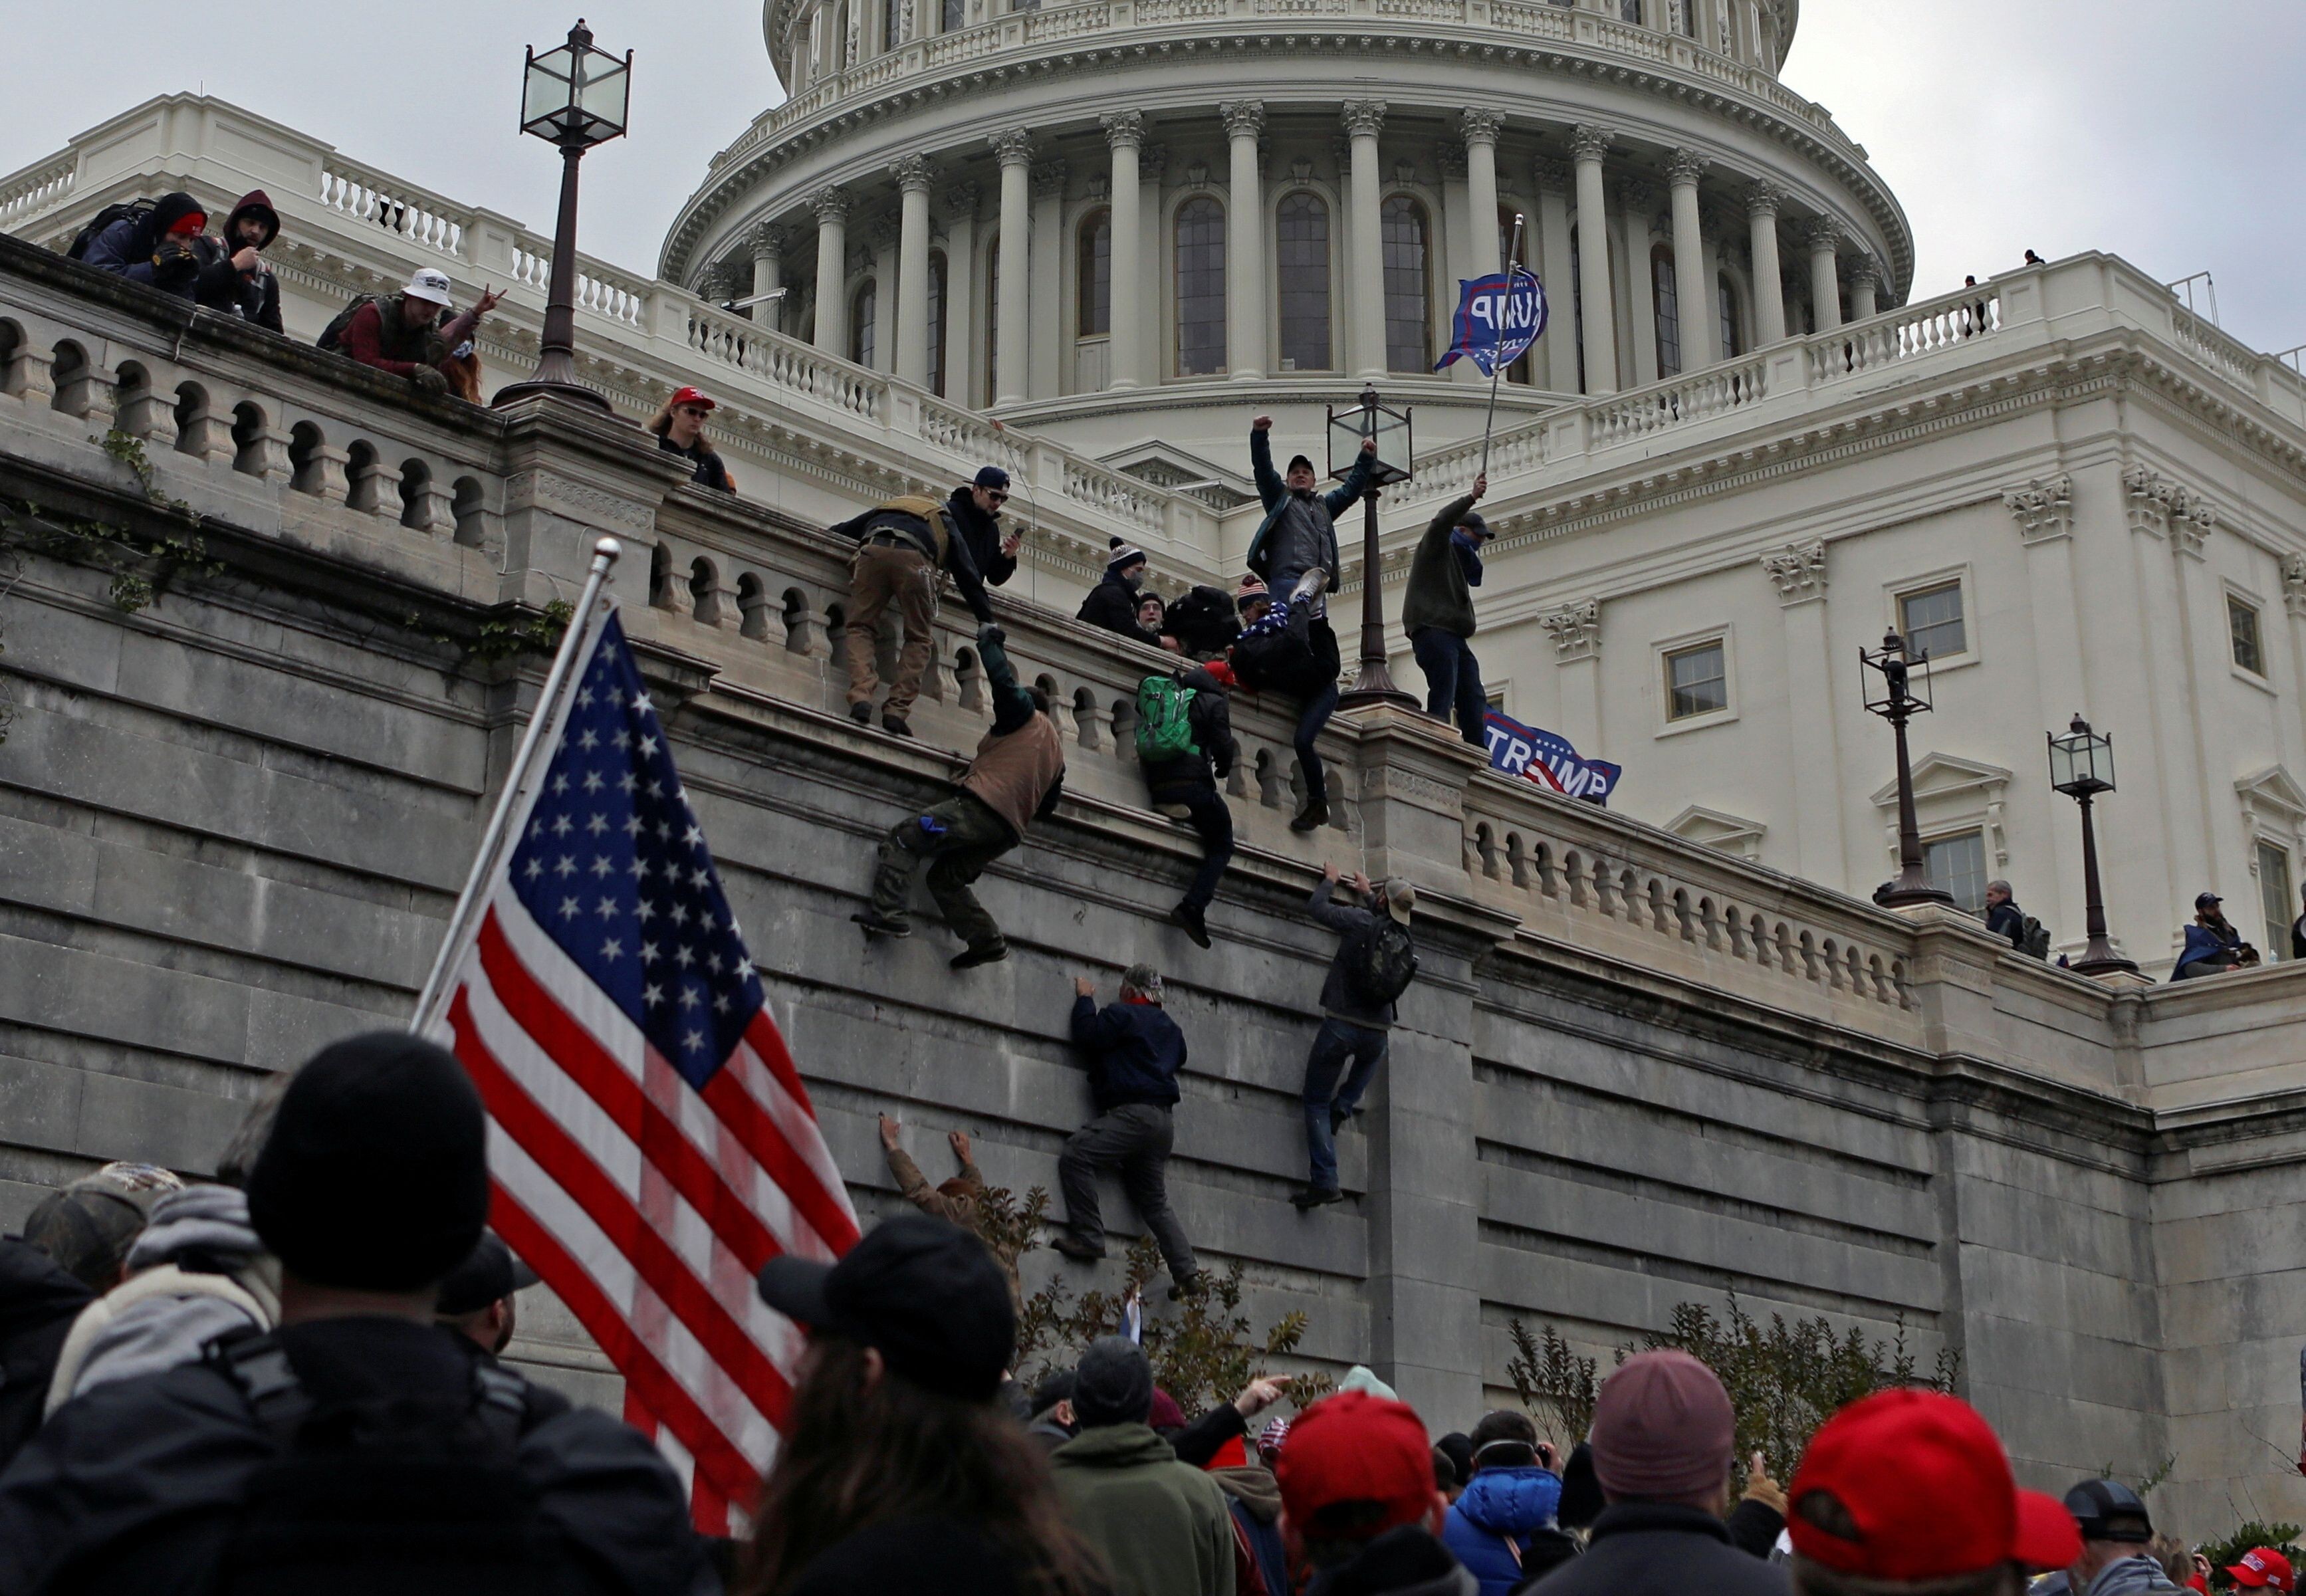 Supporters of President Donald Trump climb a wall at the US Capitol during a protest against certification of the election results by Congress on January 6. Beijing has seized on the chaos to criticise Washington. Photo: Reuters